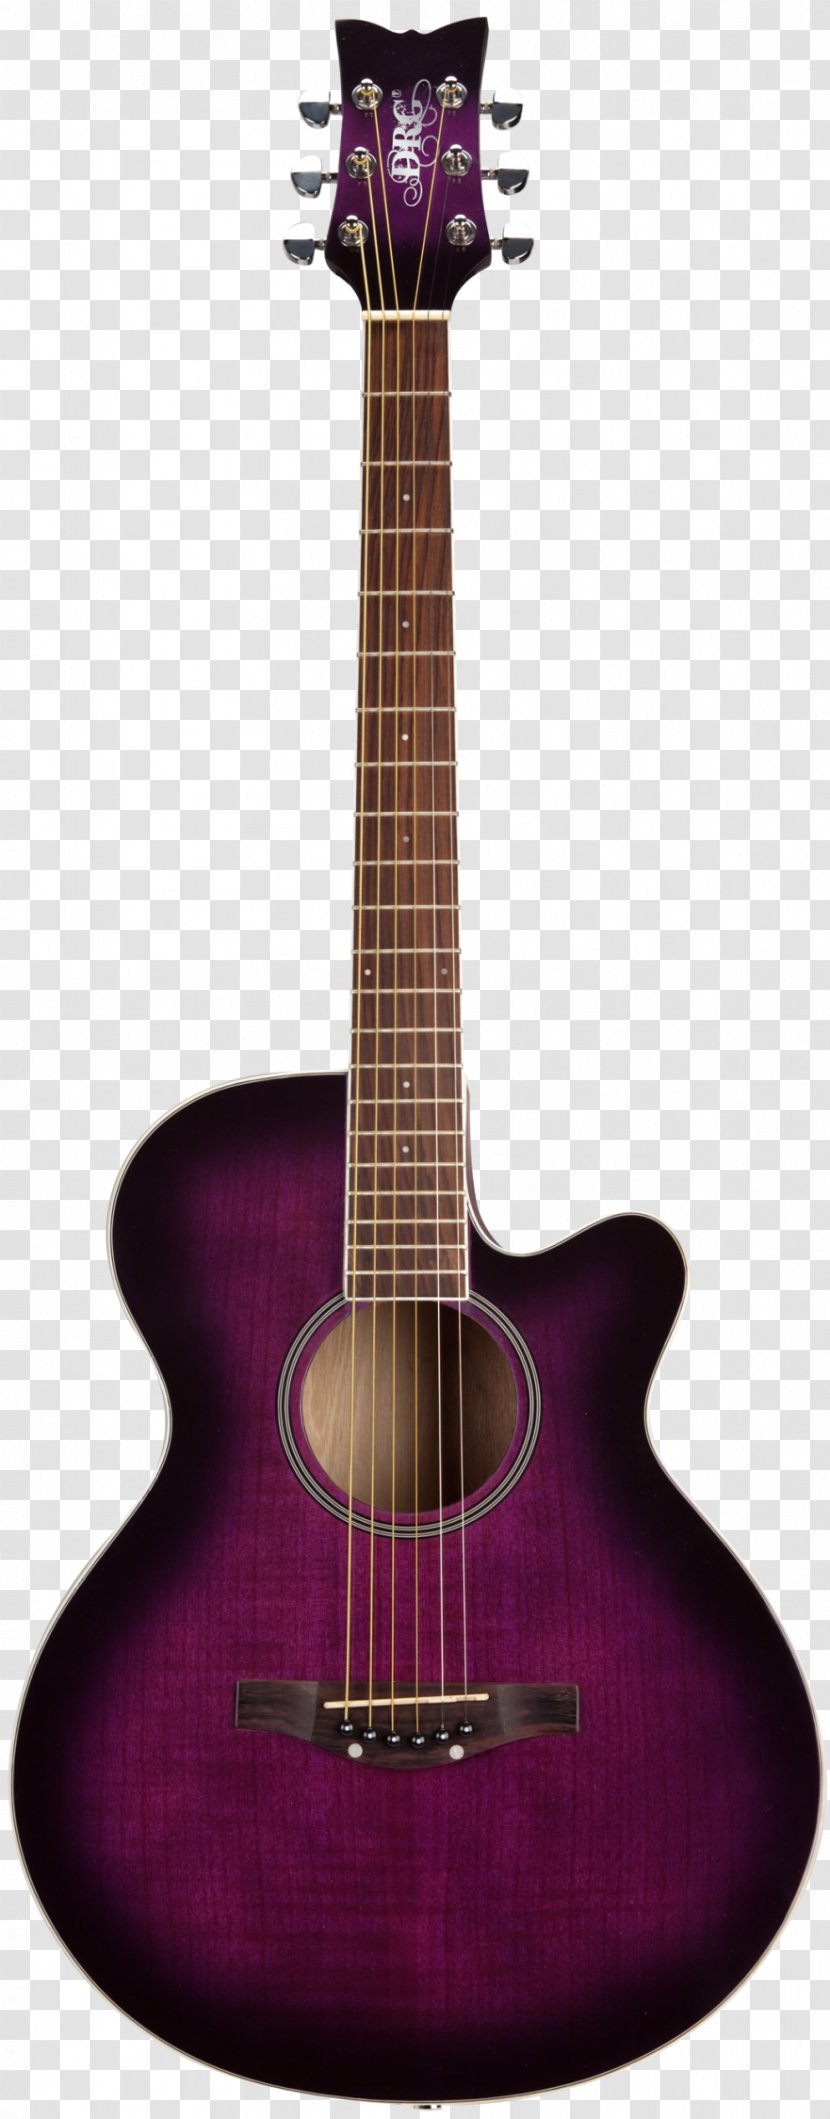 Steel-string Acoustic Guitar Acoustic-electric - Cartoon Transparent PNG